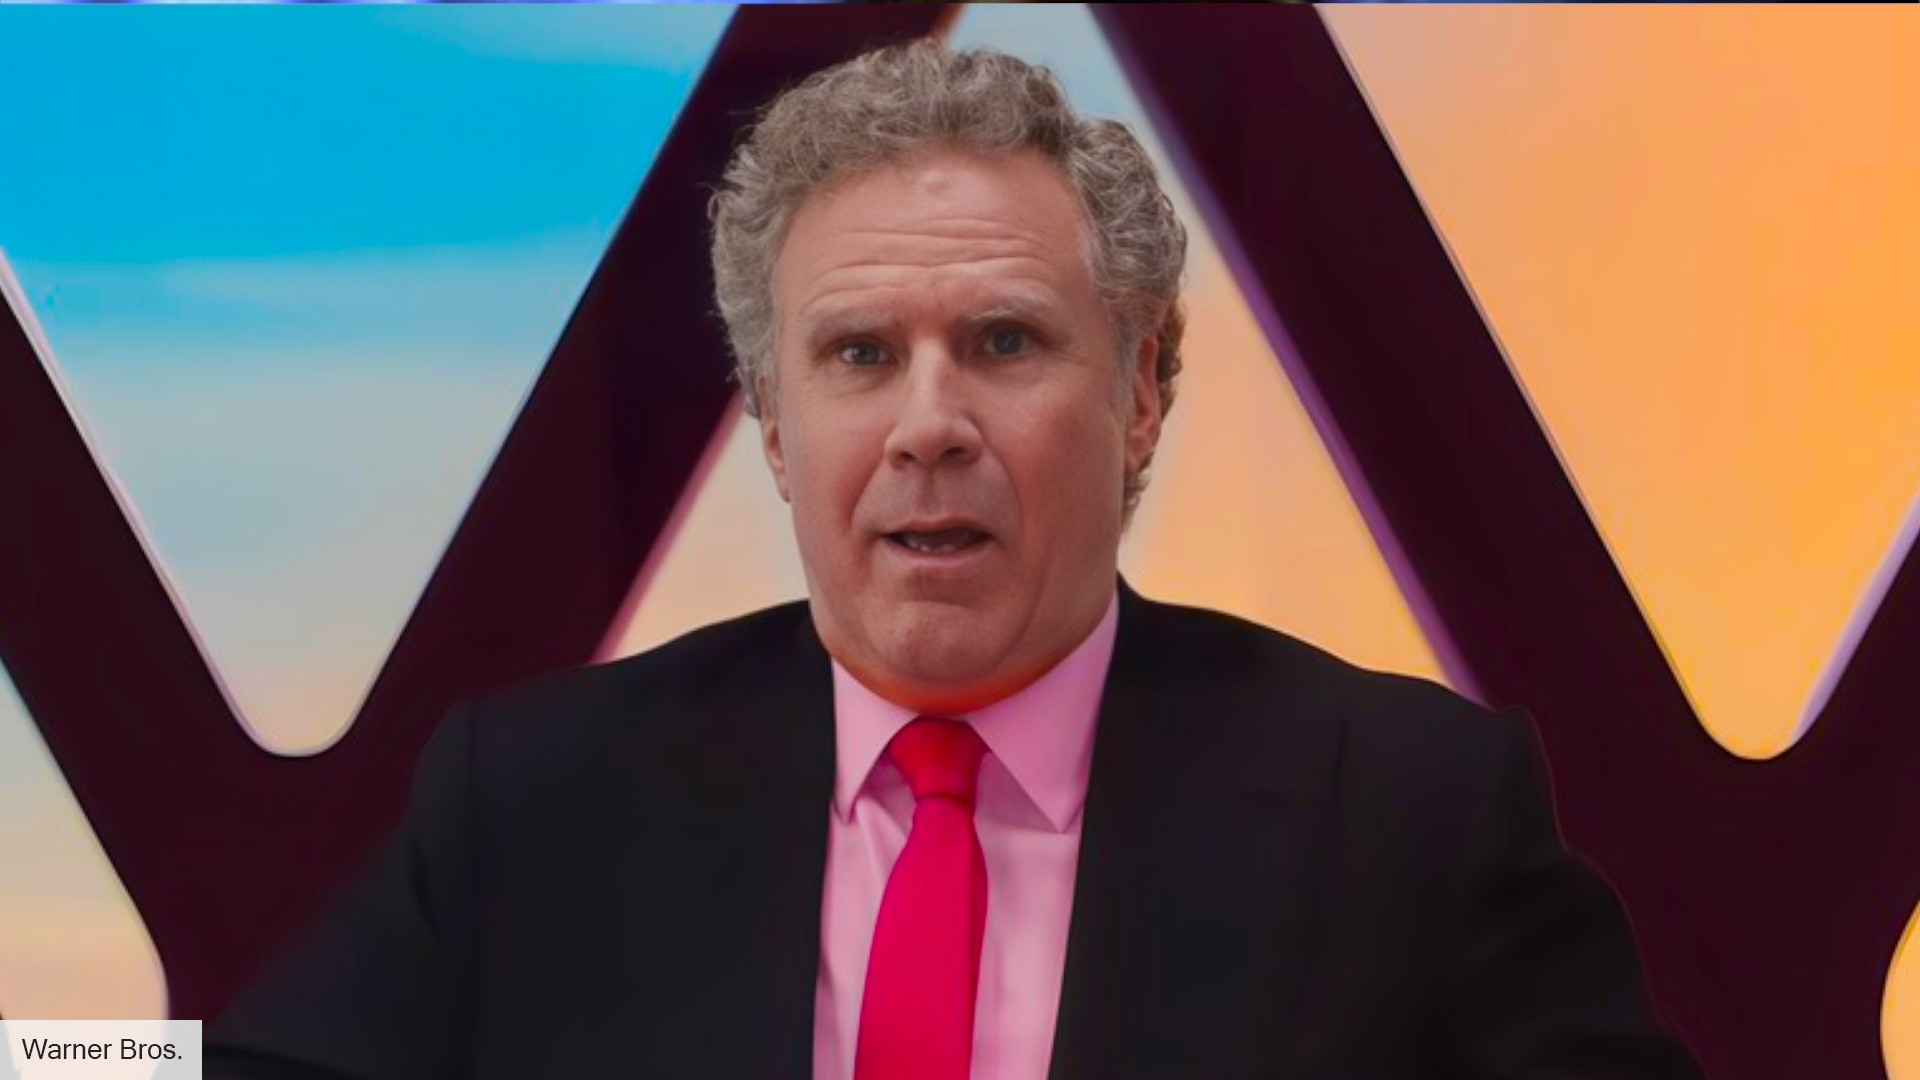 Will Ferrell’s best movies are now streaming on Netflix The Digital Fix